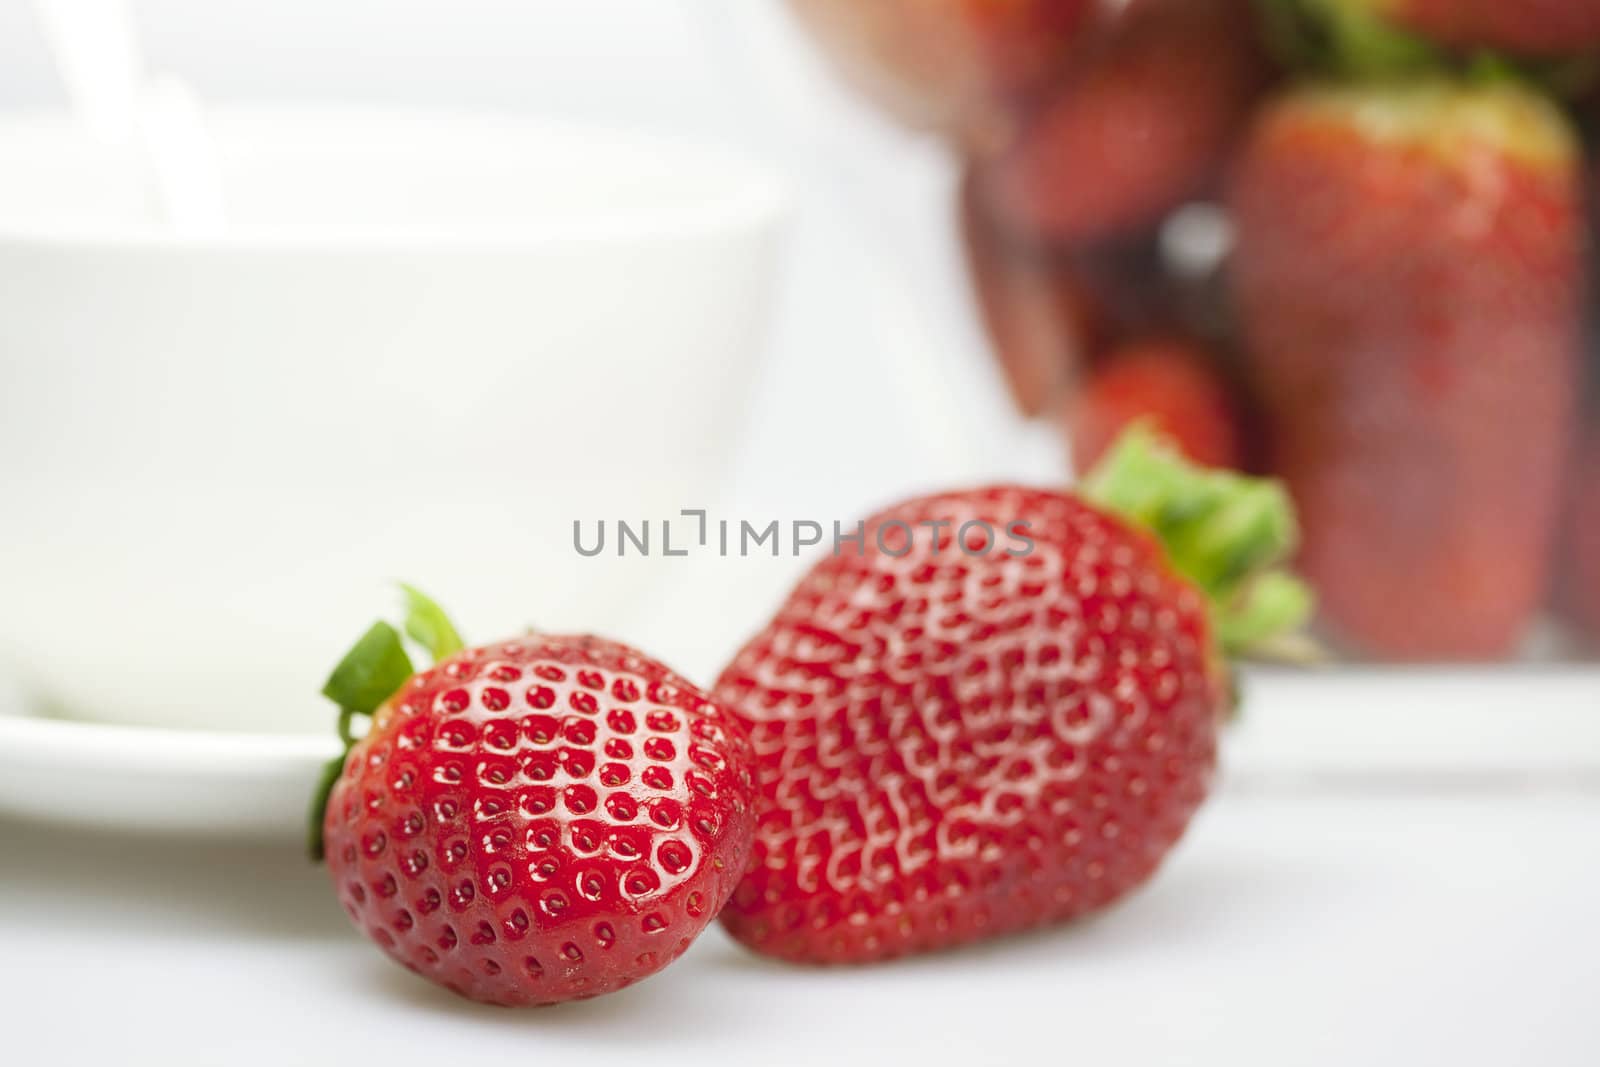 juicy strawberries and a cup isolated on white